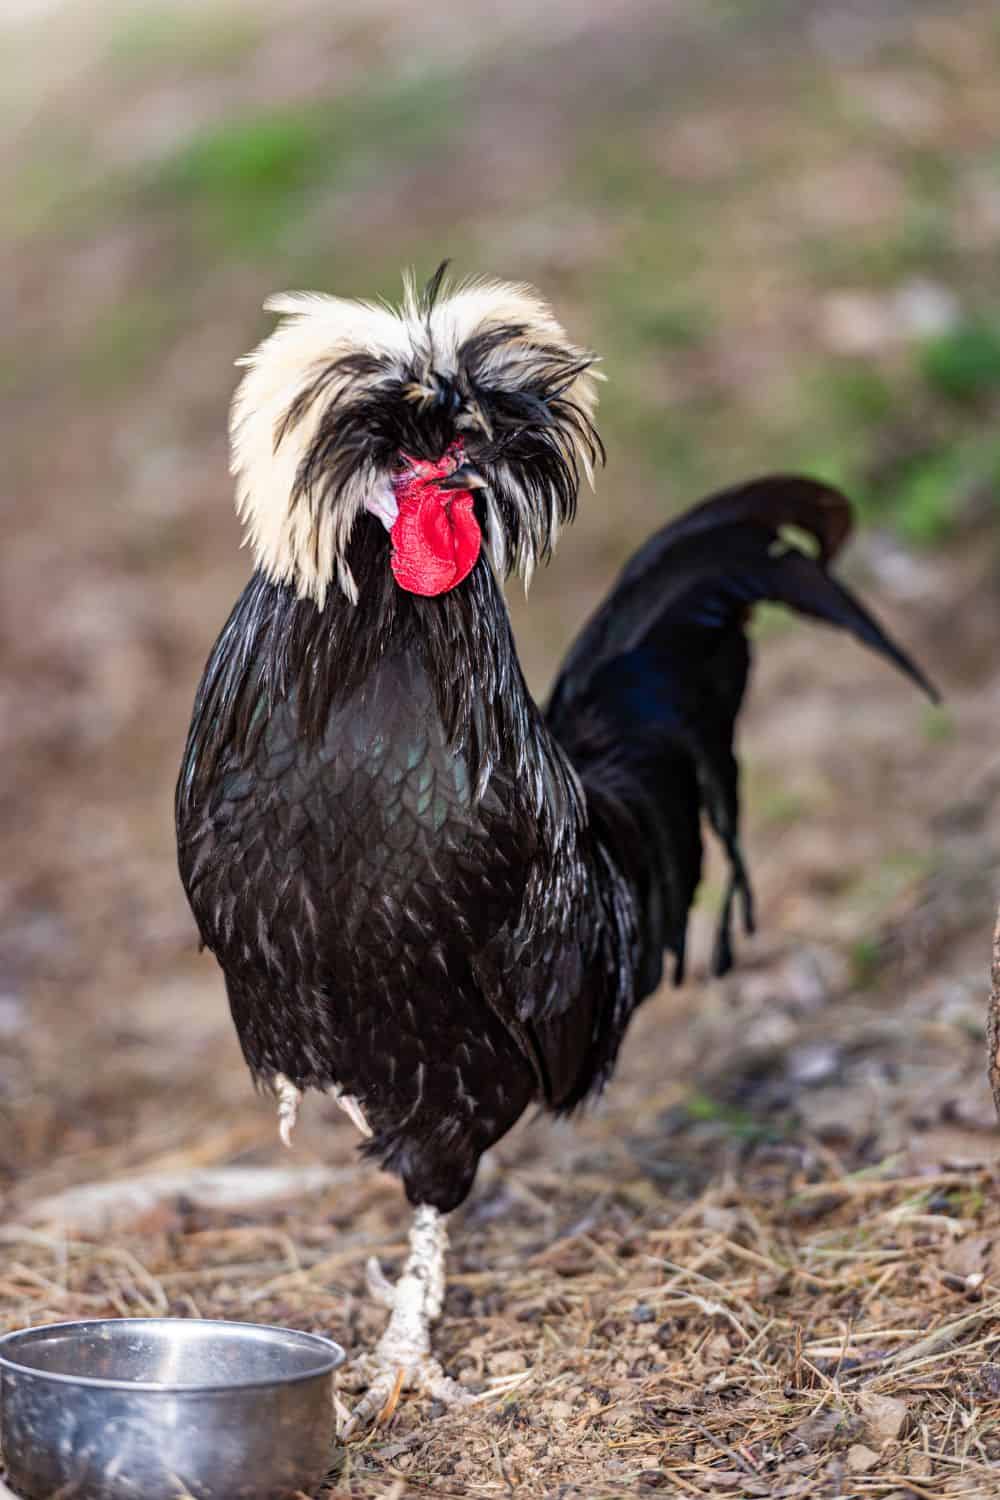 What are the characteristics of a Polish chicken